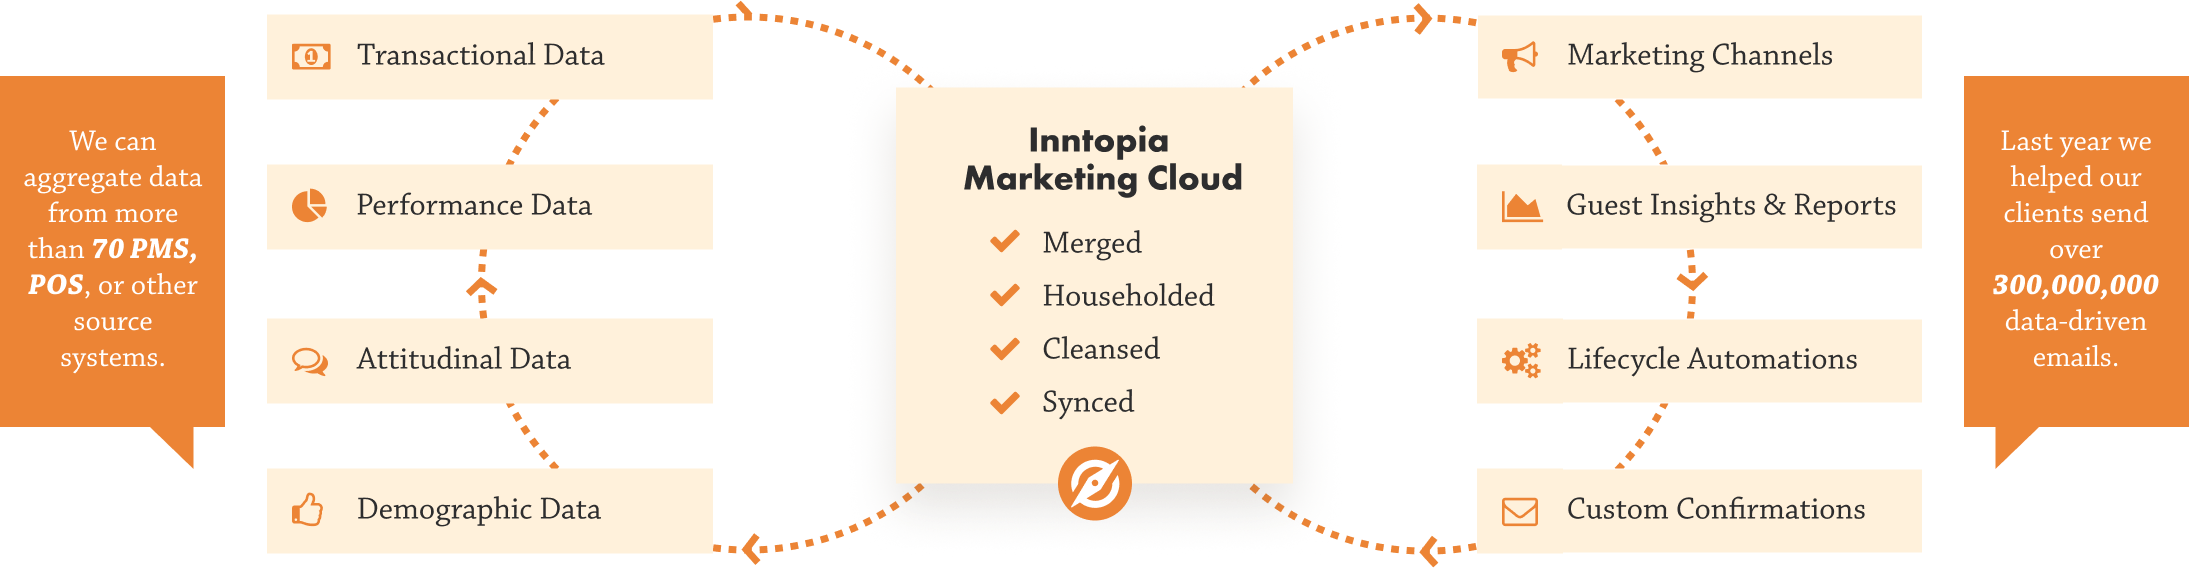 chart showing how data flows through inntopia marketing cloud hospitality CRM system